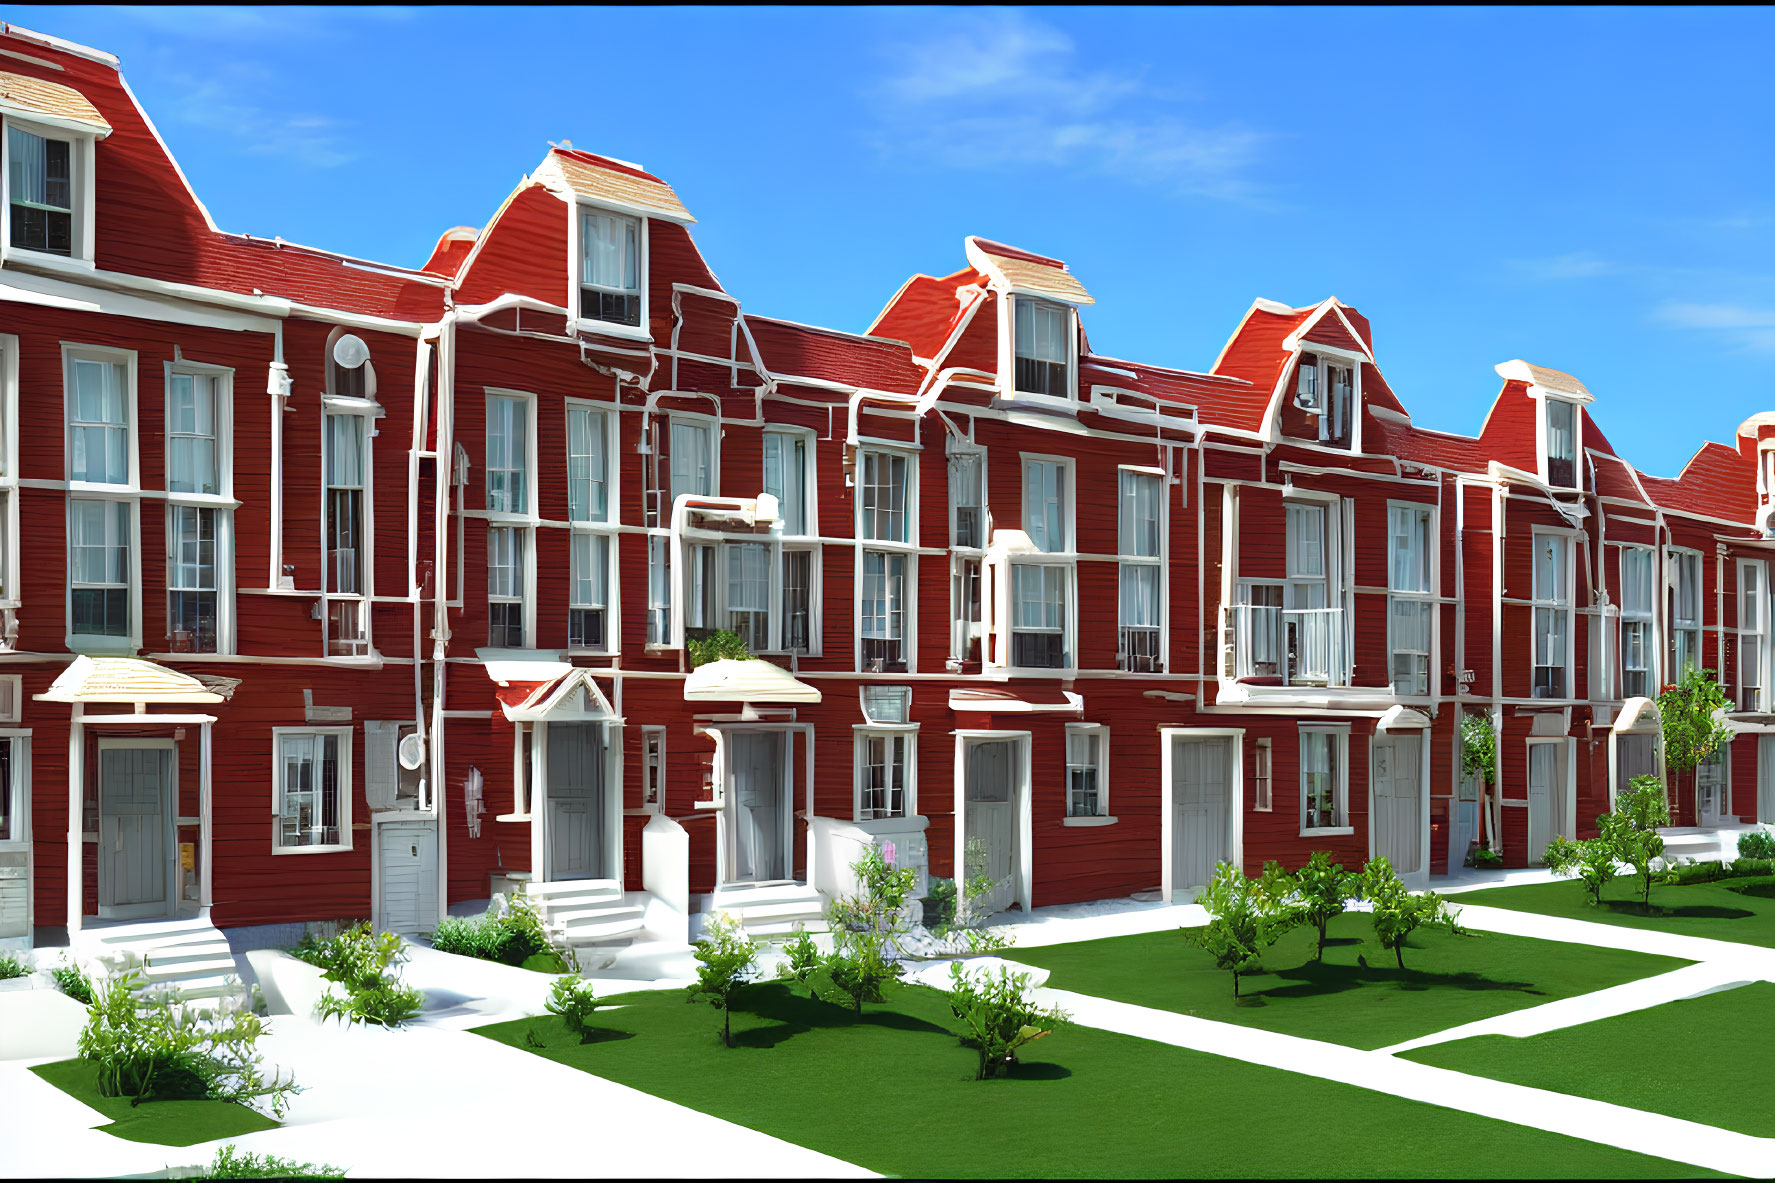 Red Brick Townhouses with Gabled Roofs and Balconies